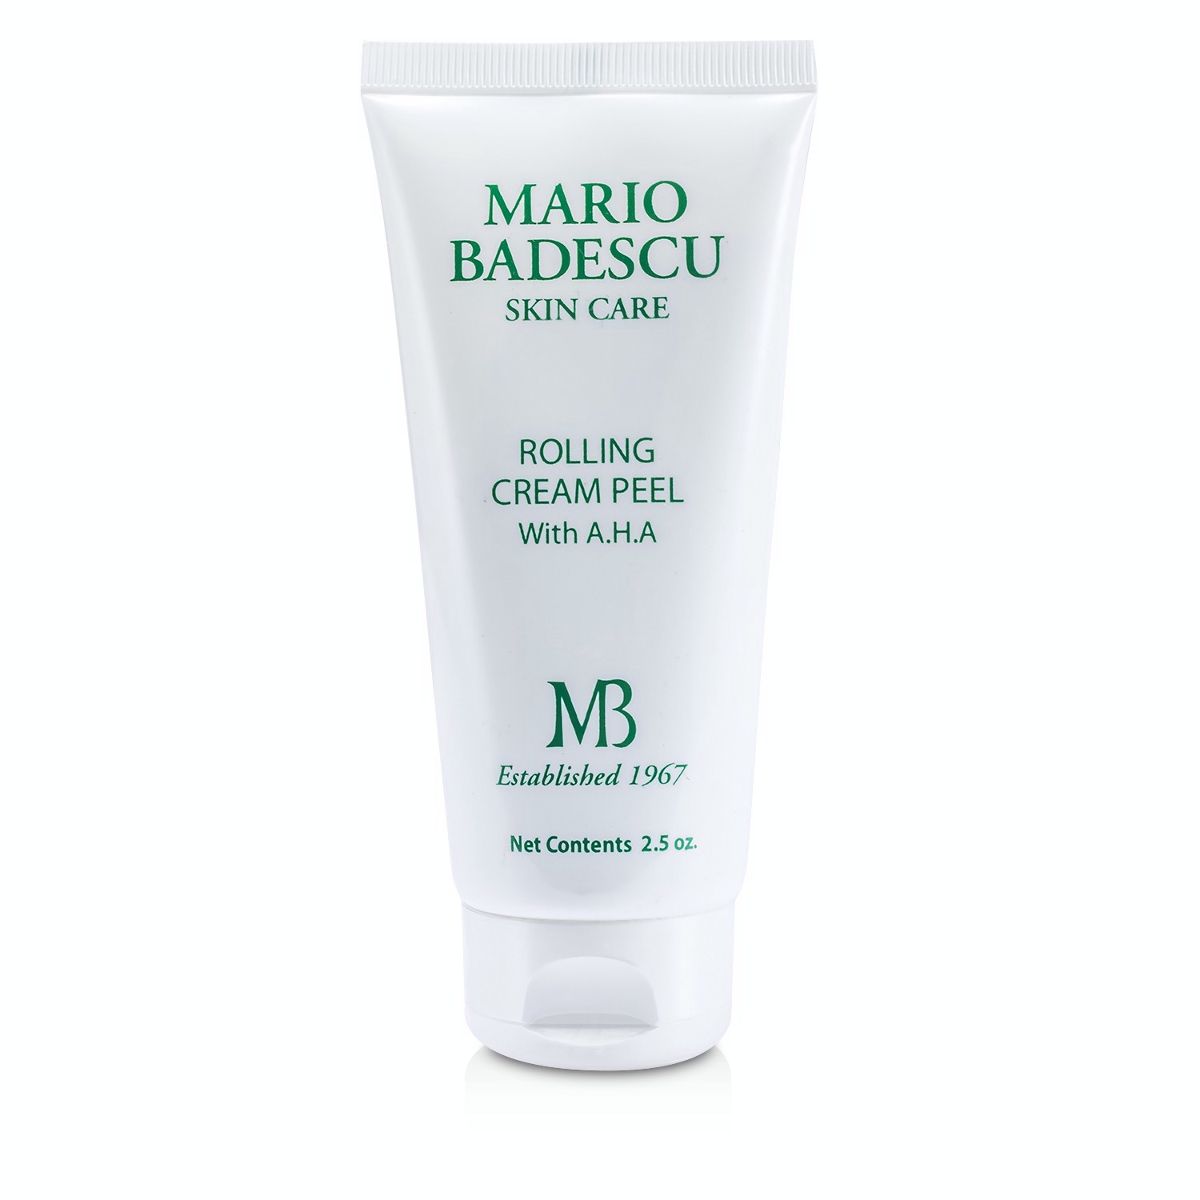 Rolling Cream Peel With AHA - For All Skin Types Mario Badescu Image